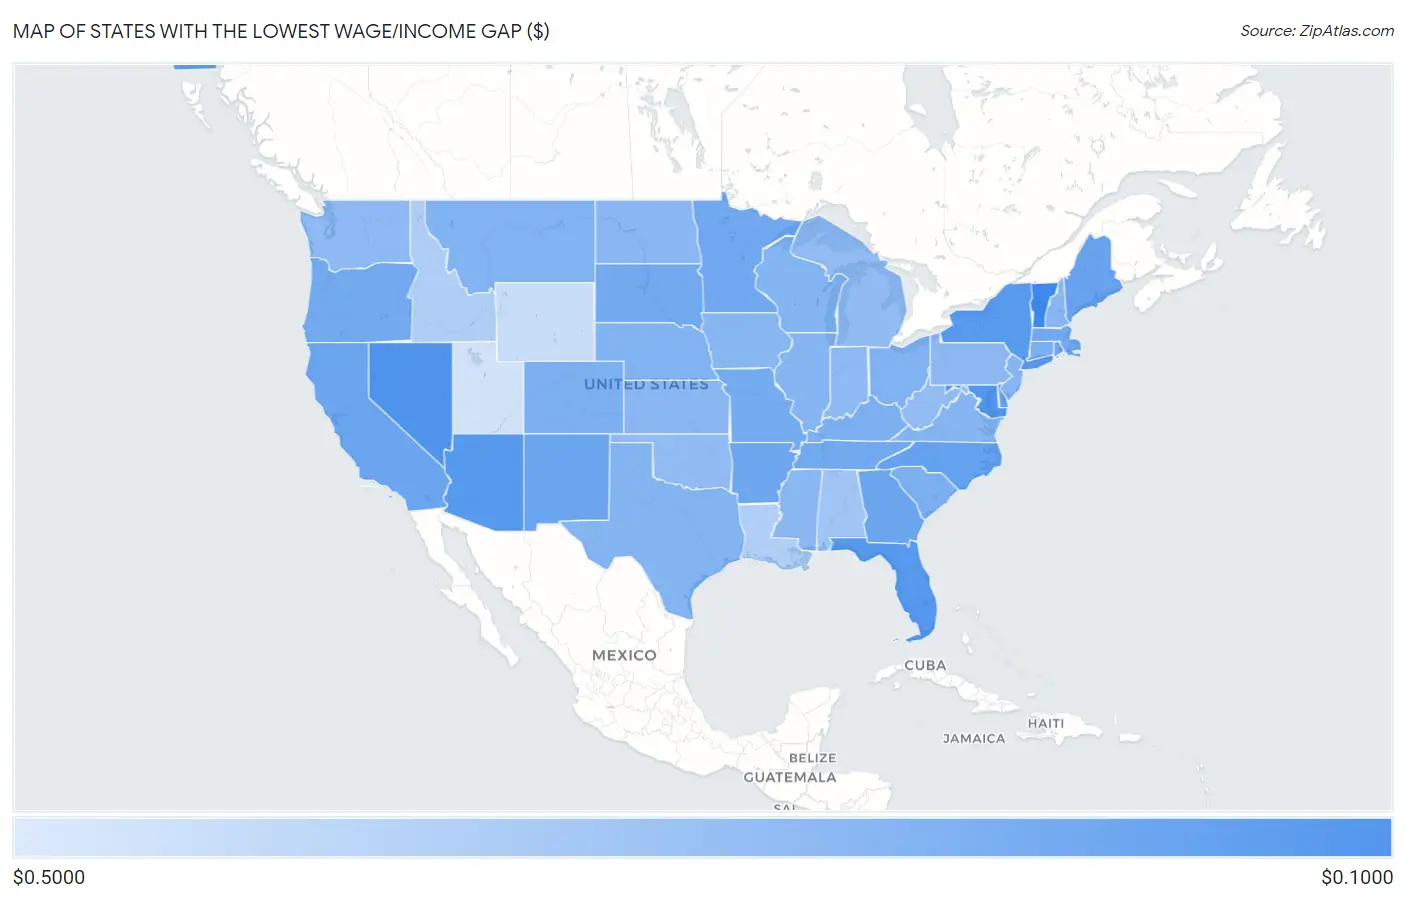 States with the Lowest Wage/Income Gap ($) in the United States Map